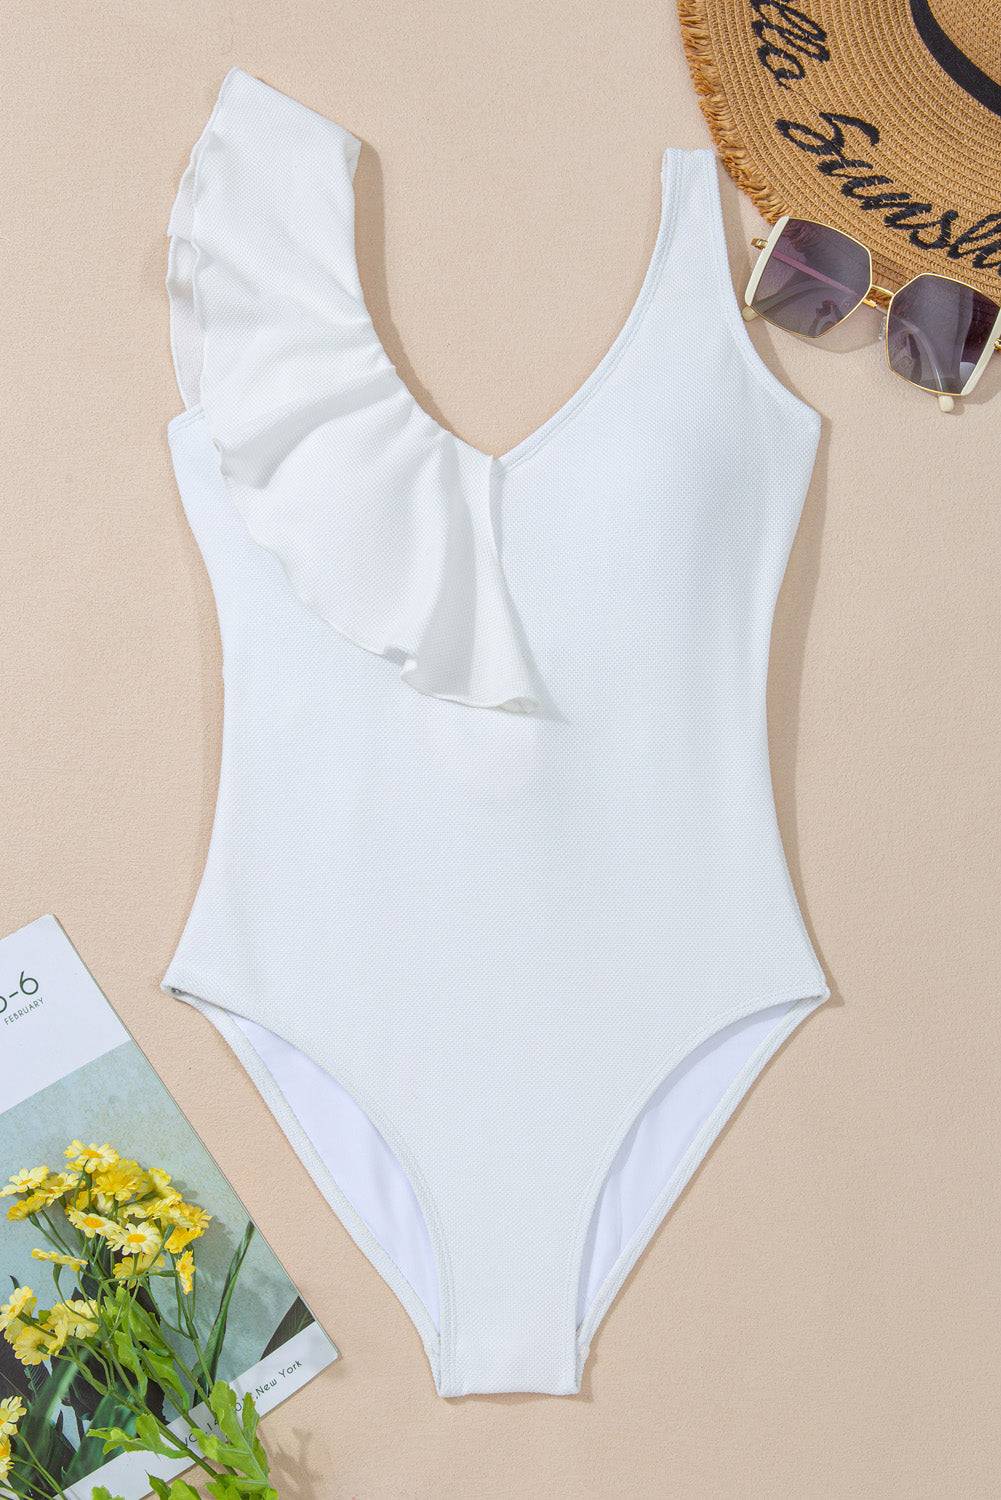 a white one piece swimsuit next to a hat and sunglasses